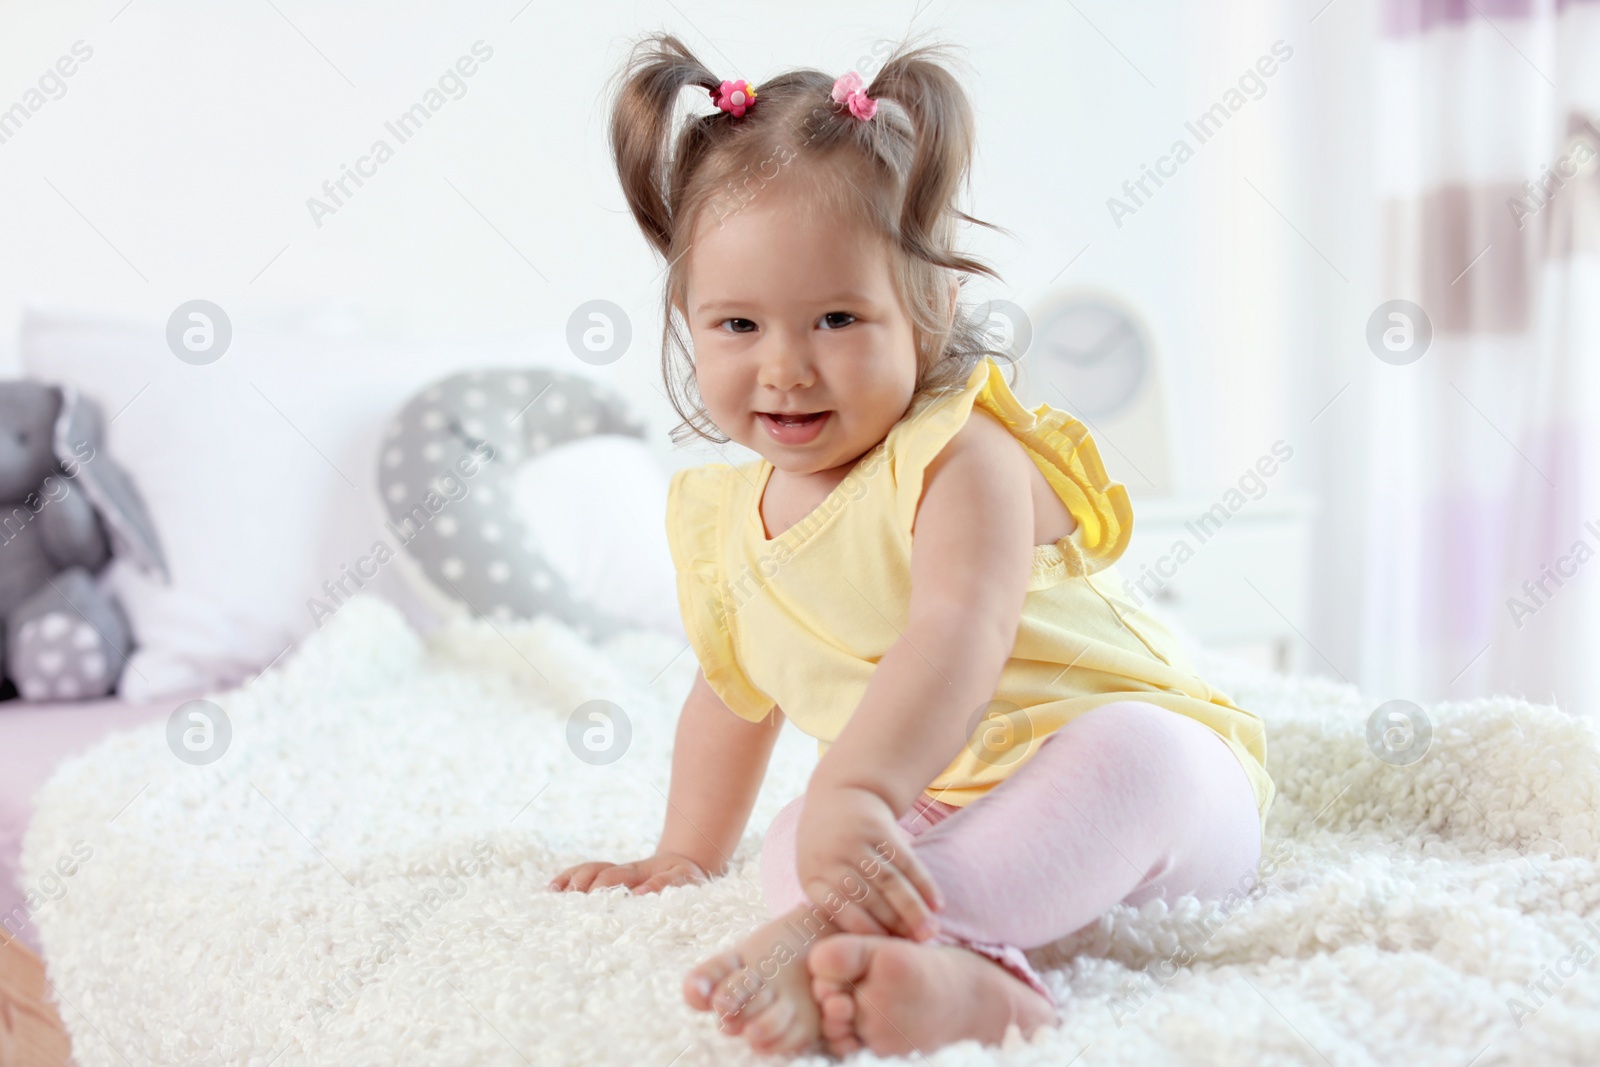 Photo of Adorable little baby girl sitting on bed in room